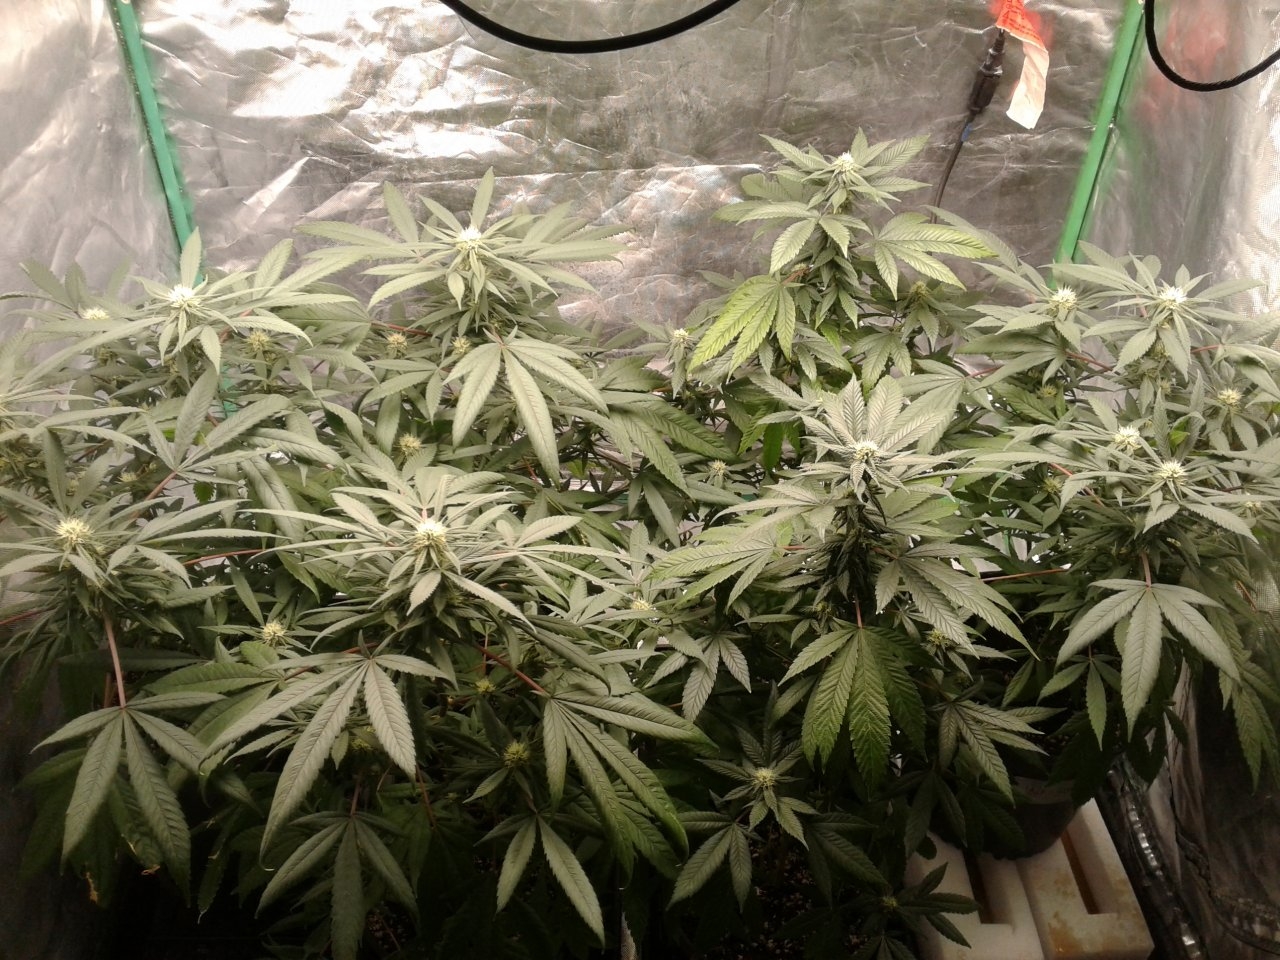 Two days from four weeks flowering